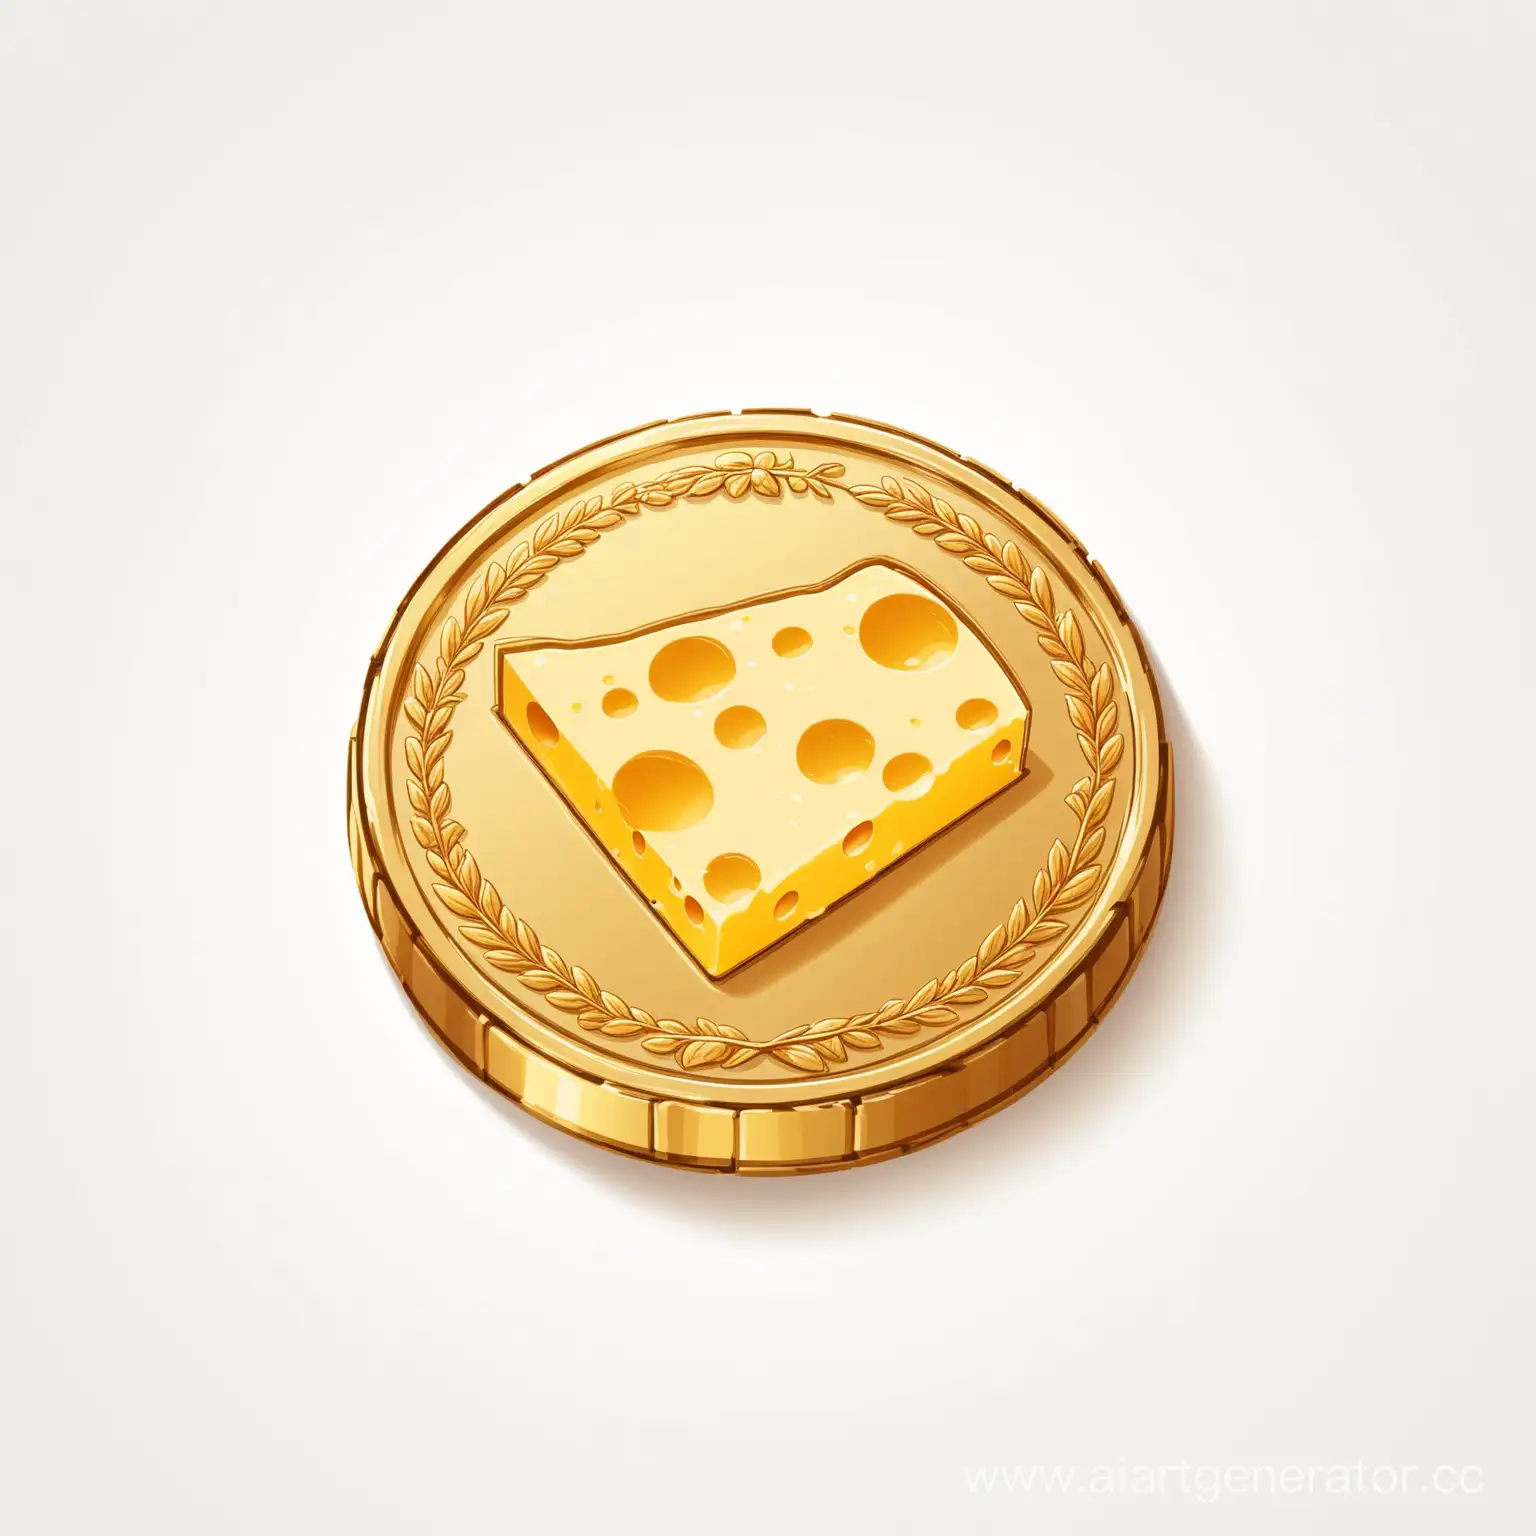 white background, one gold coin with a cheese design on it